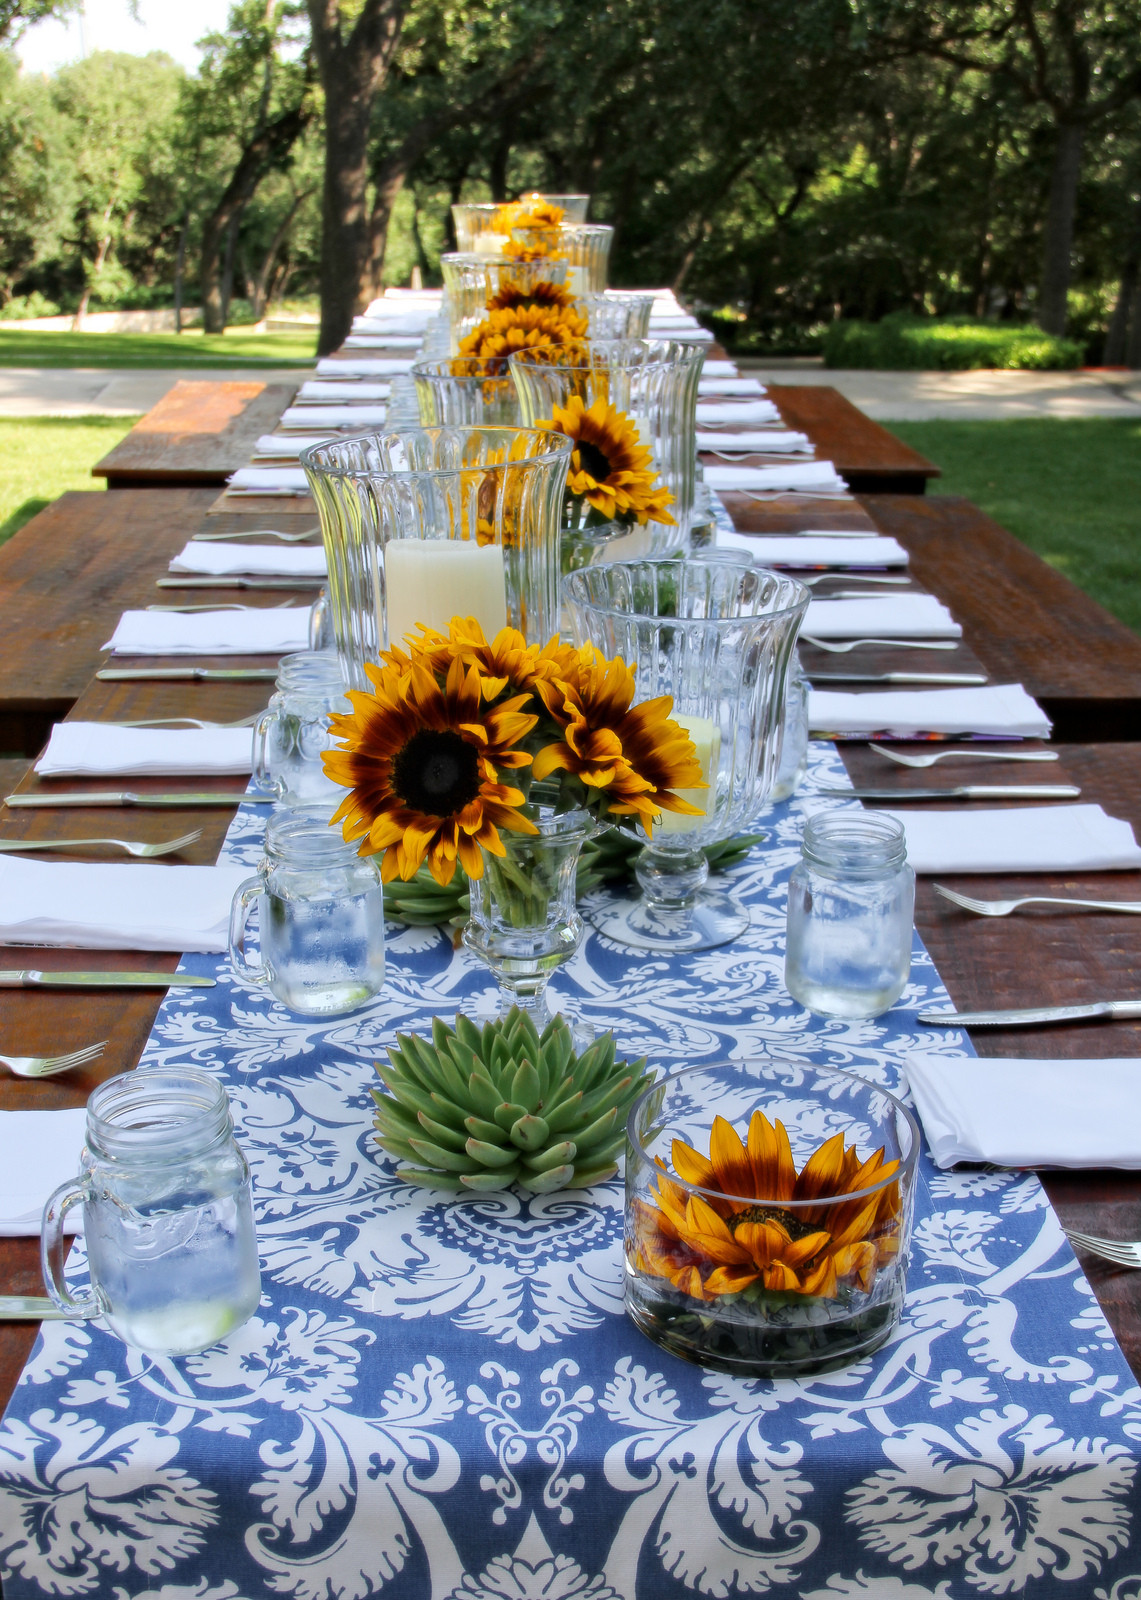 Backyard Table Ideas
 50 Outdoor Party Ideas You Should Try Out This Summer